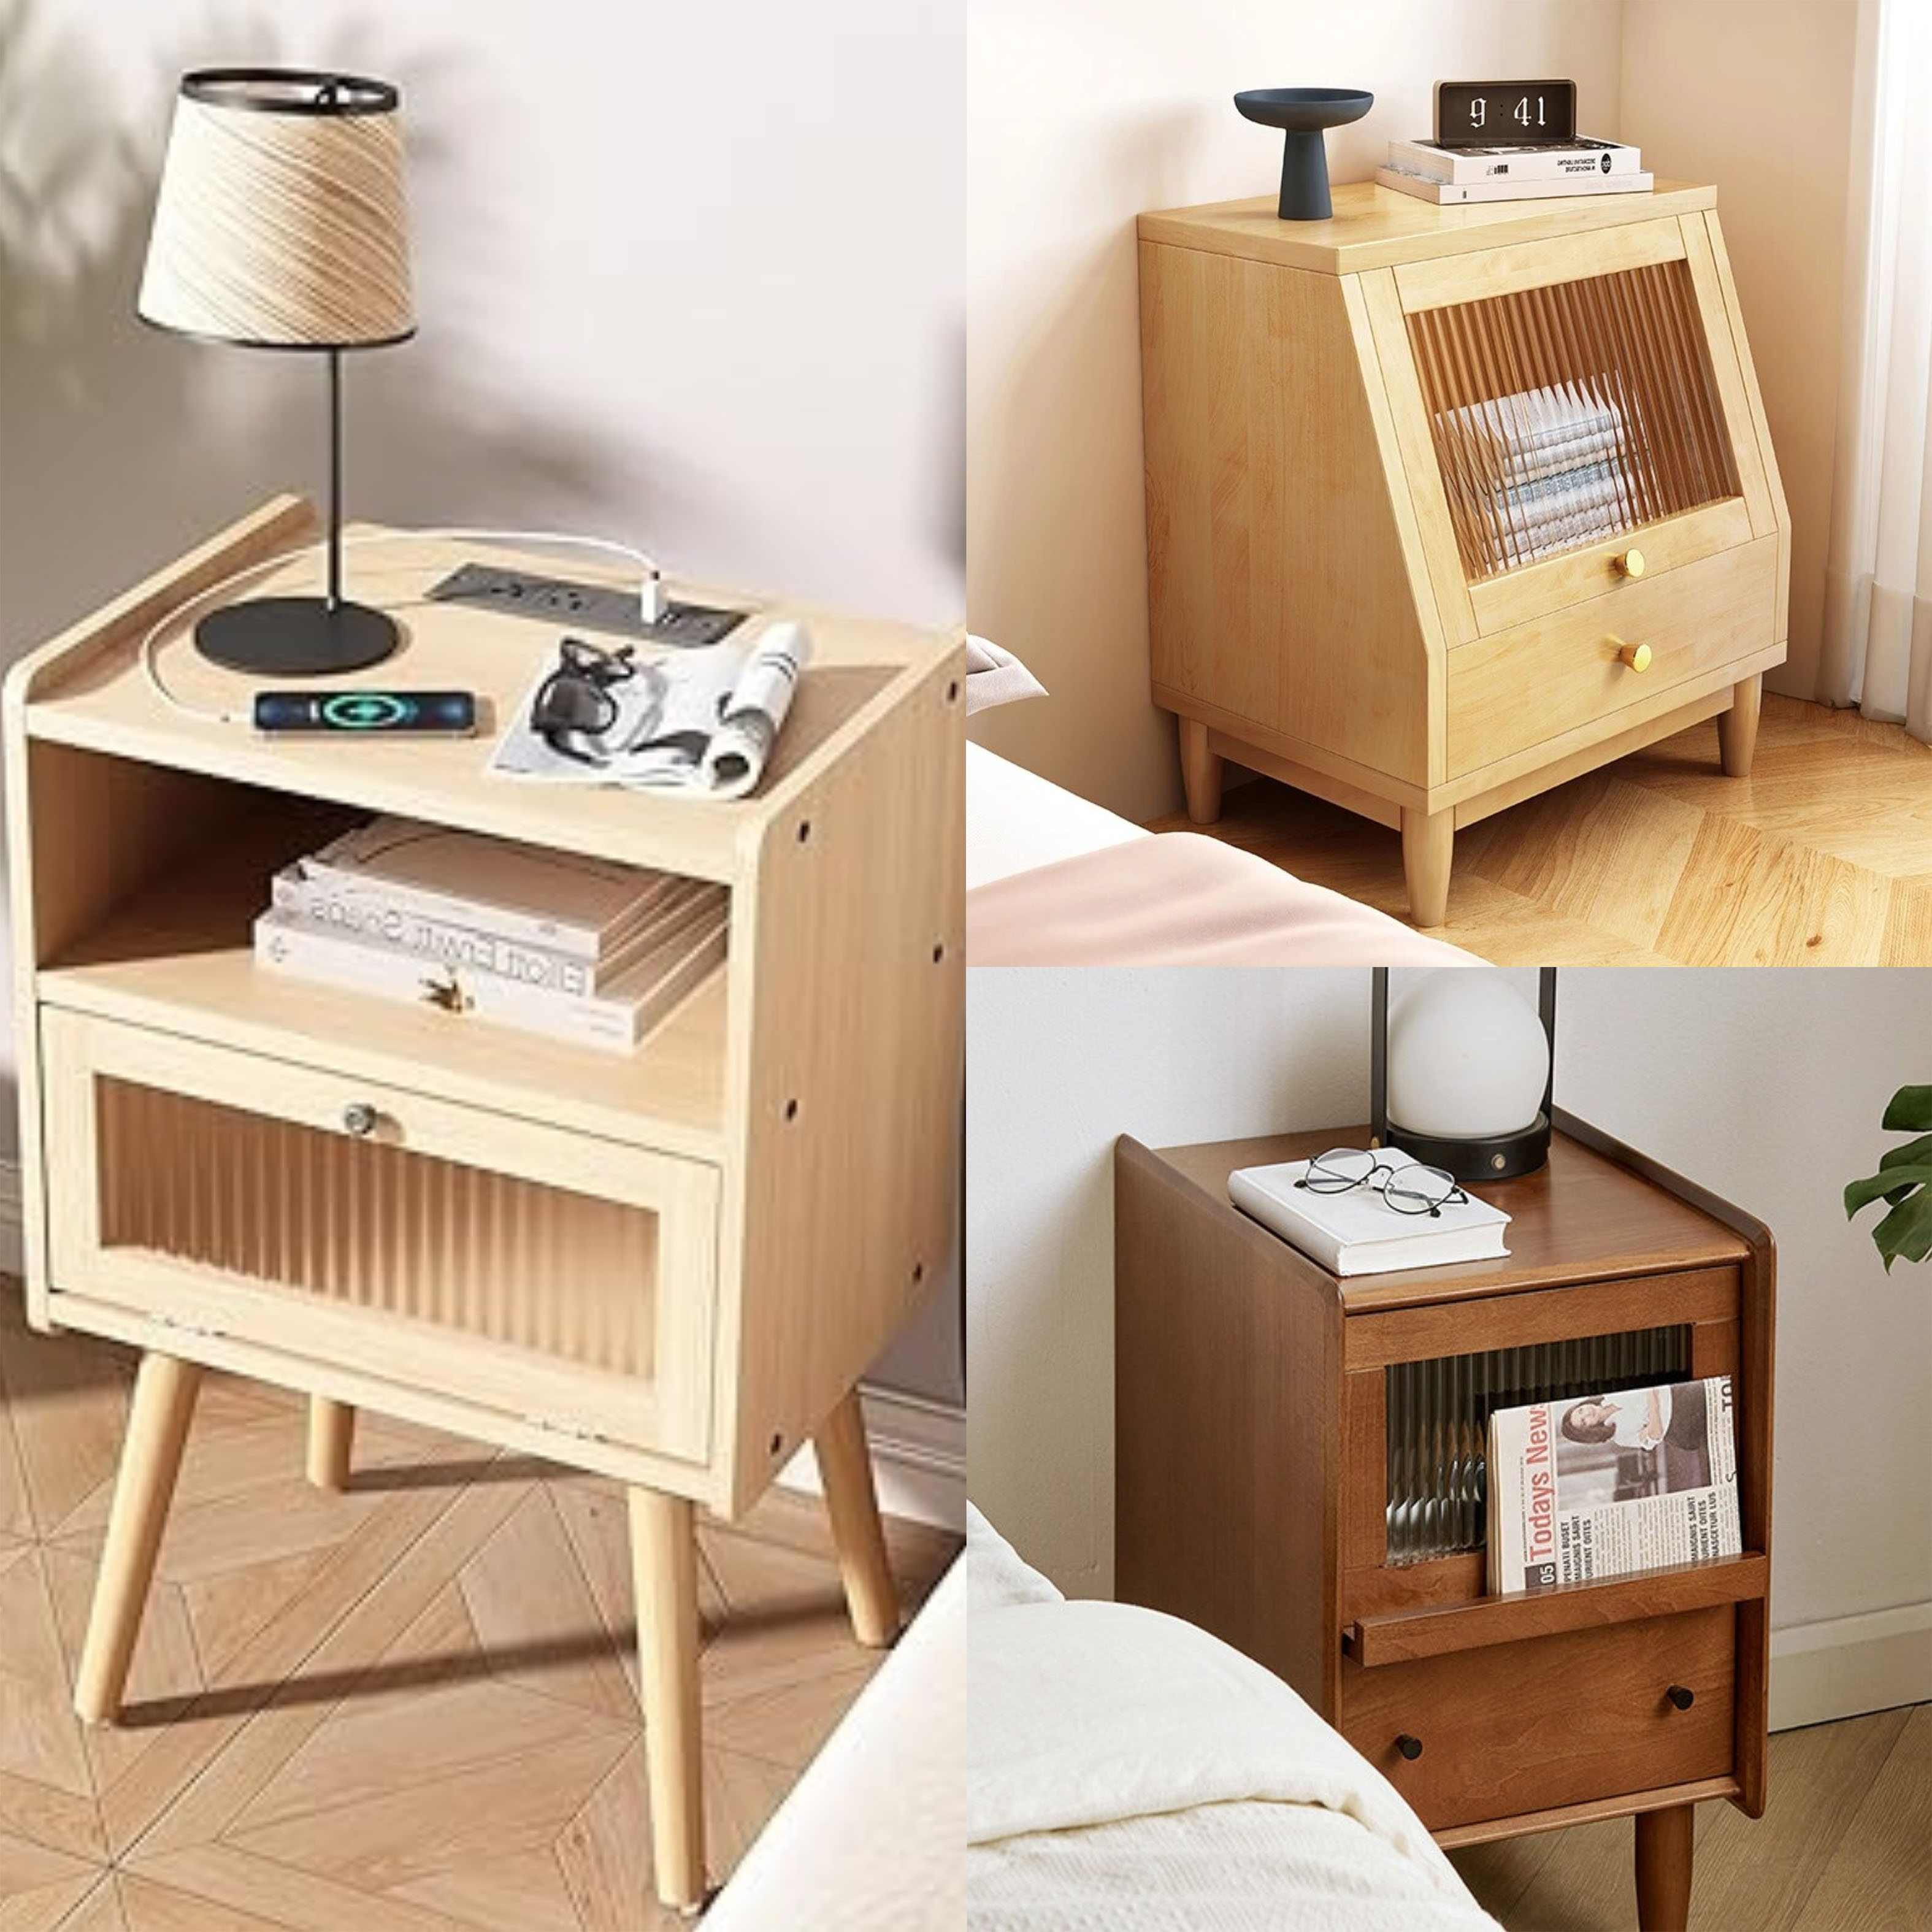 Bedside table with glass doors